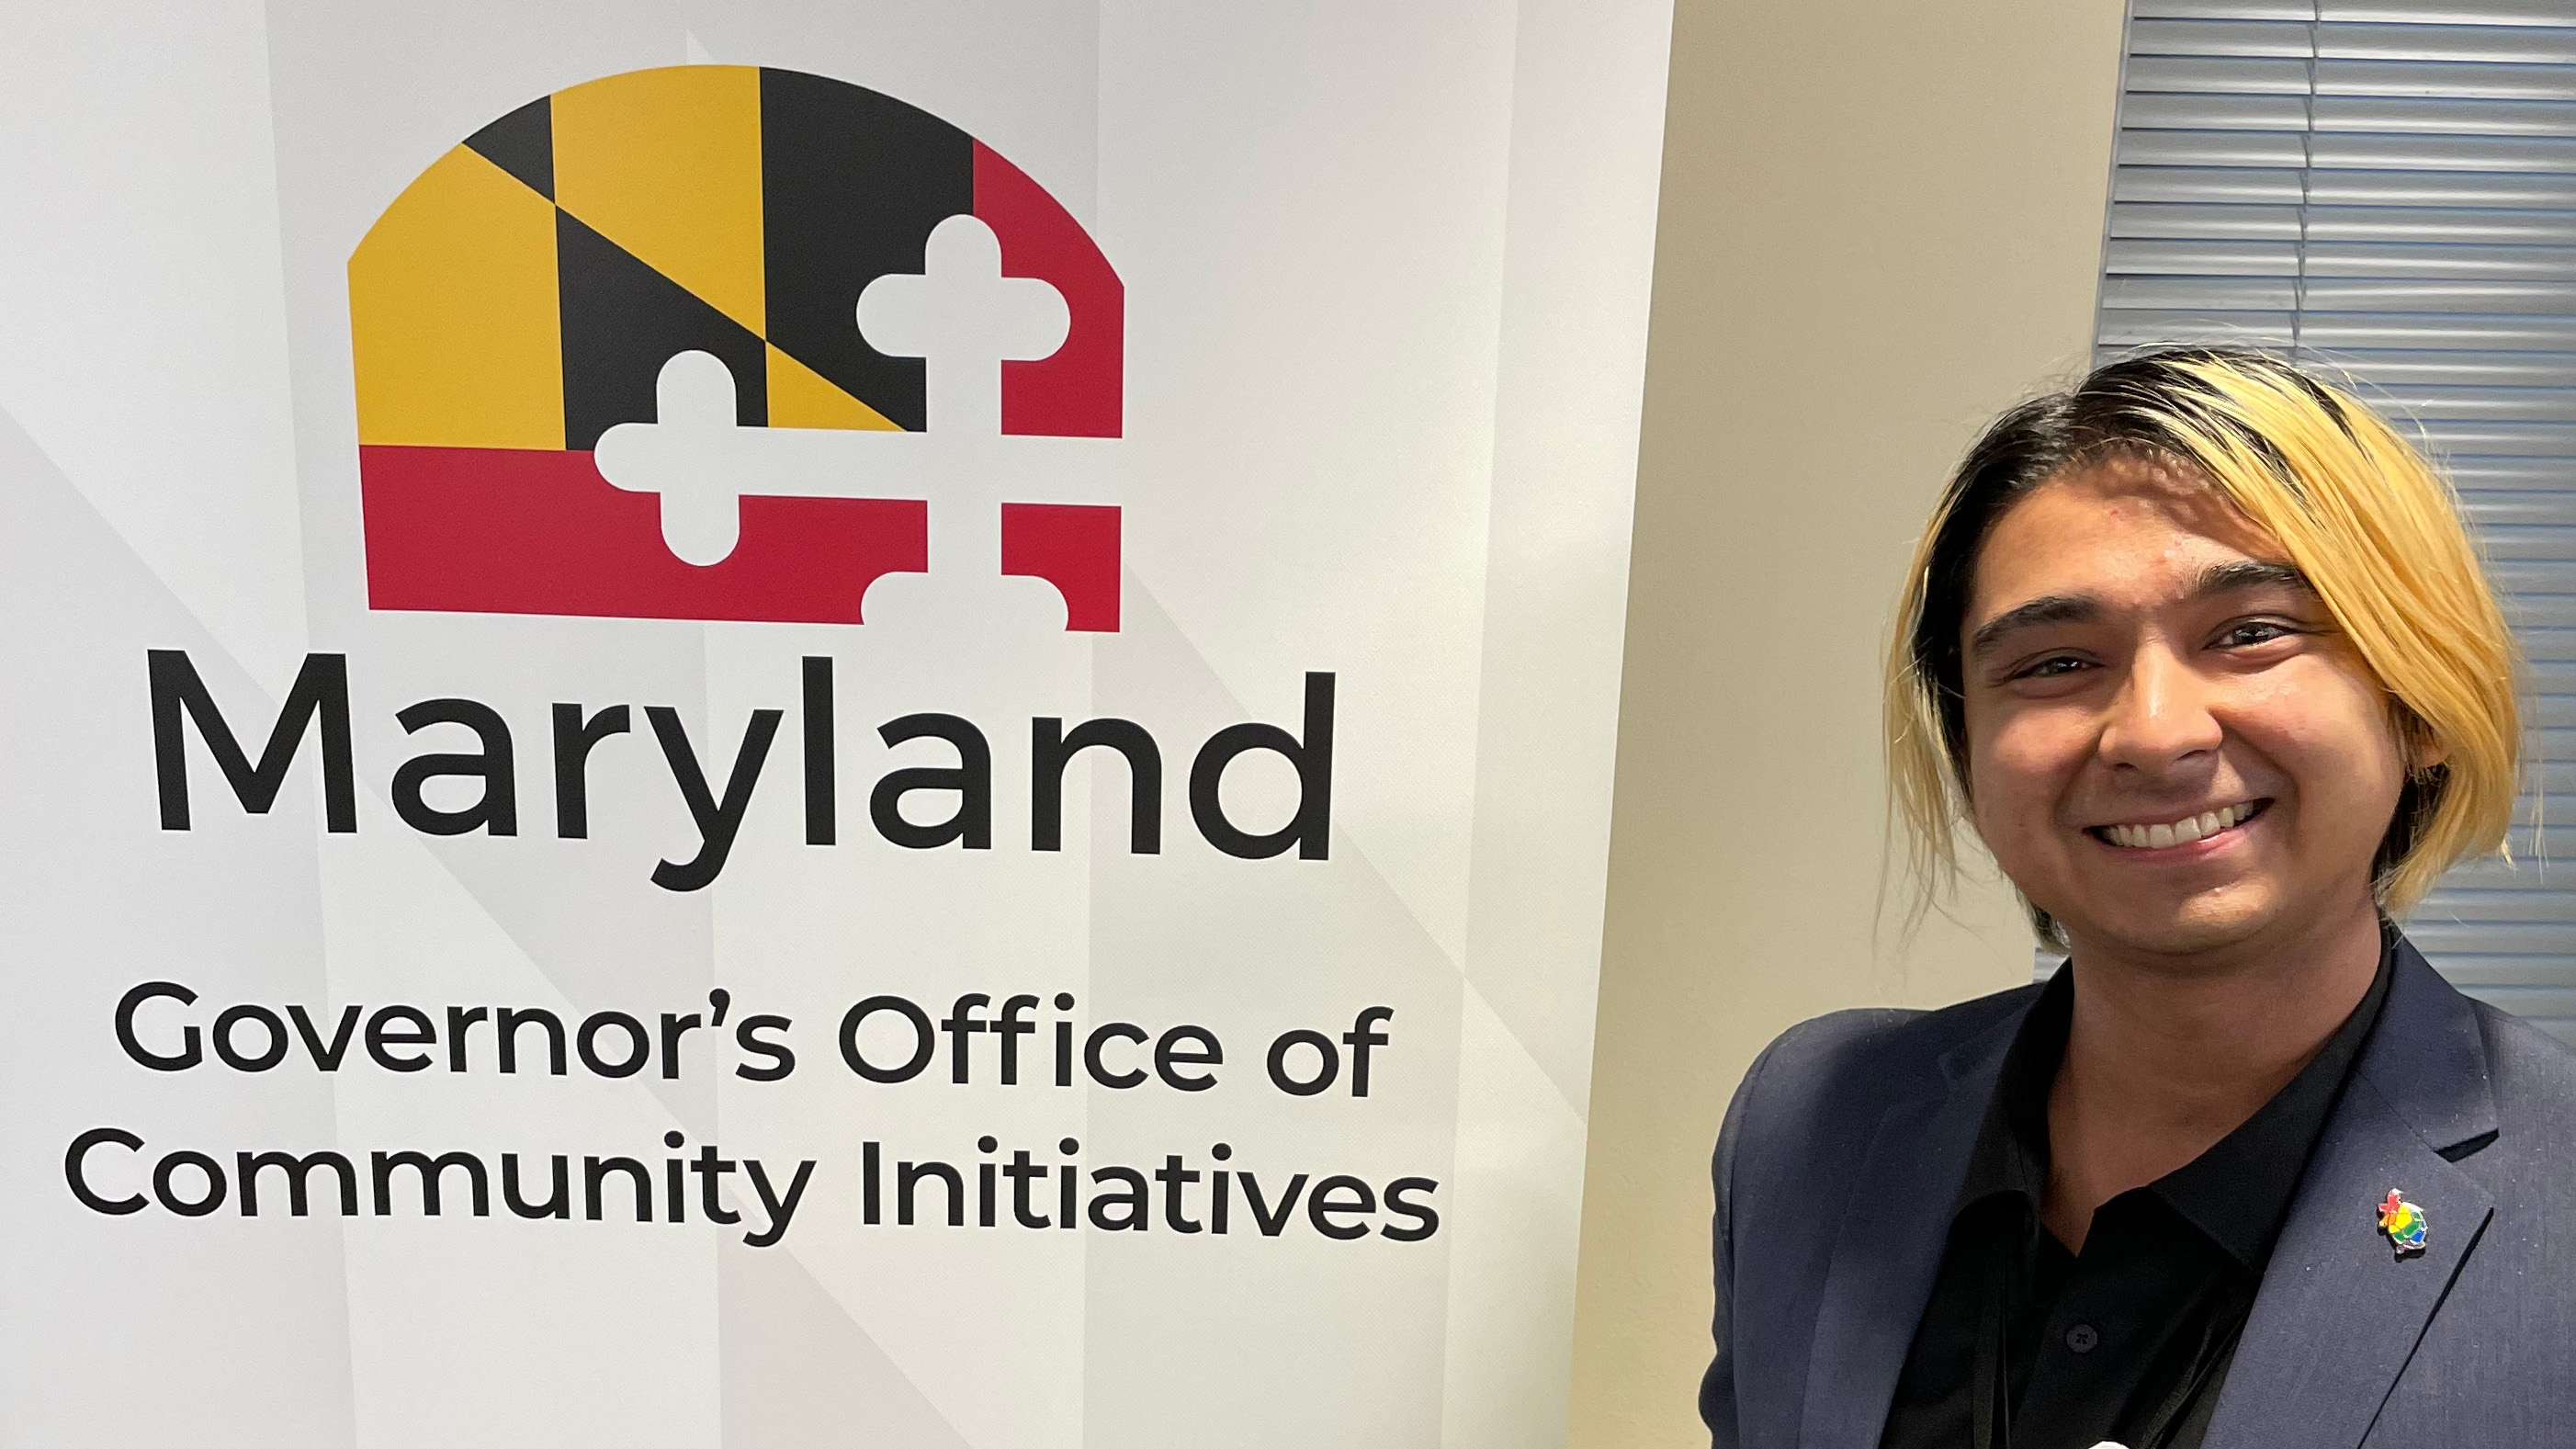 Photo of M Pease next to Maryland Governor's Office of Community Initiatives sign